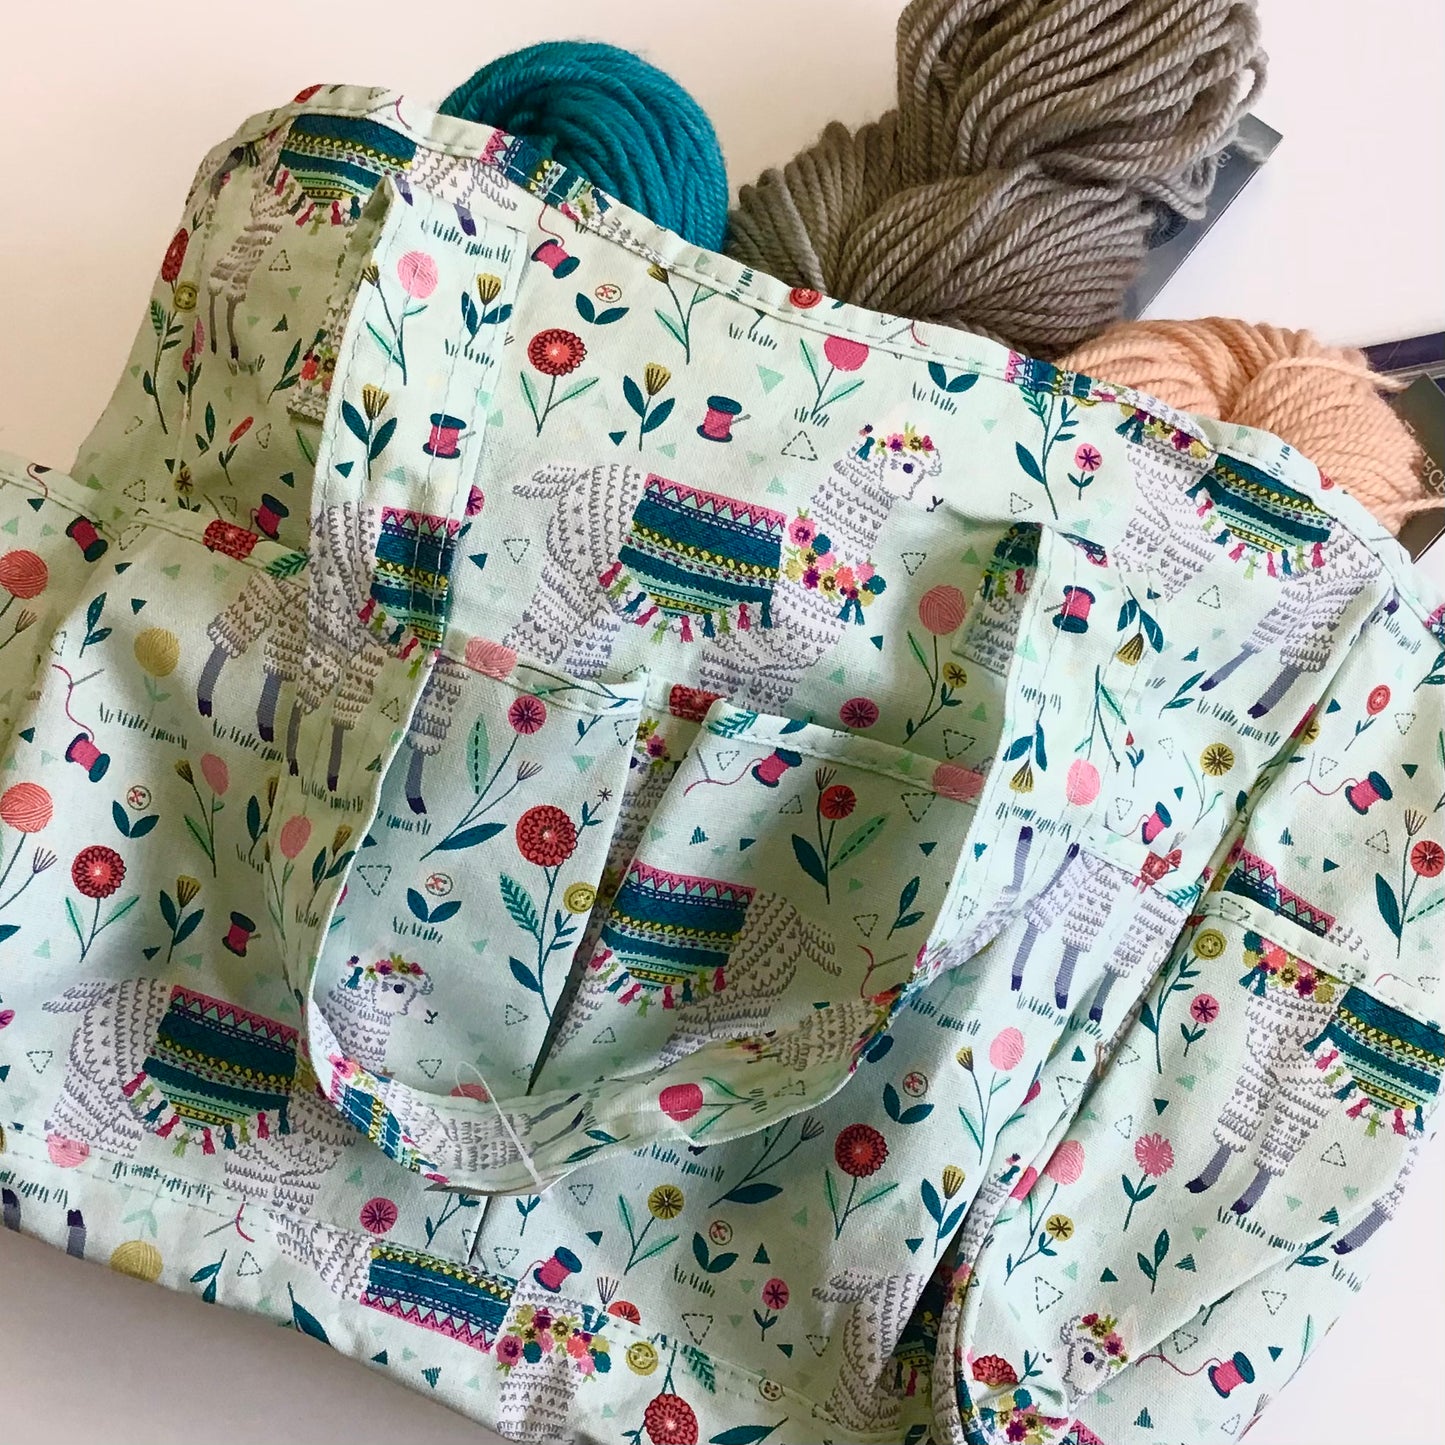 SEW EASY Knitting Project Bag (out of stock)